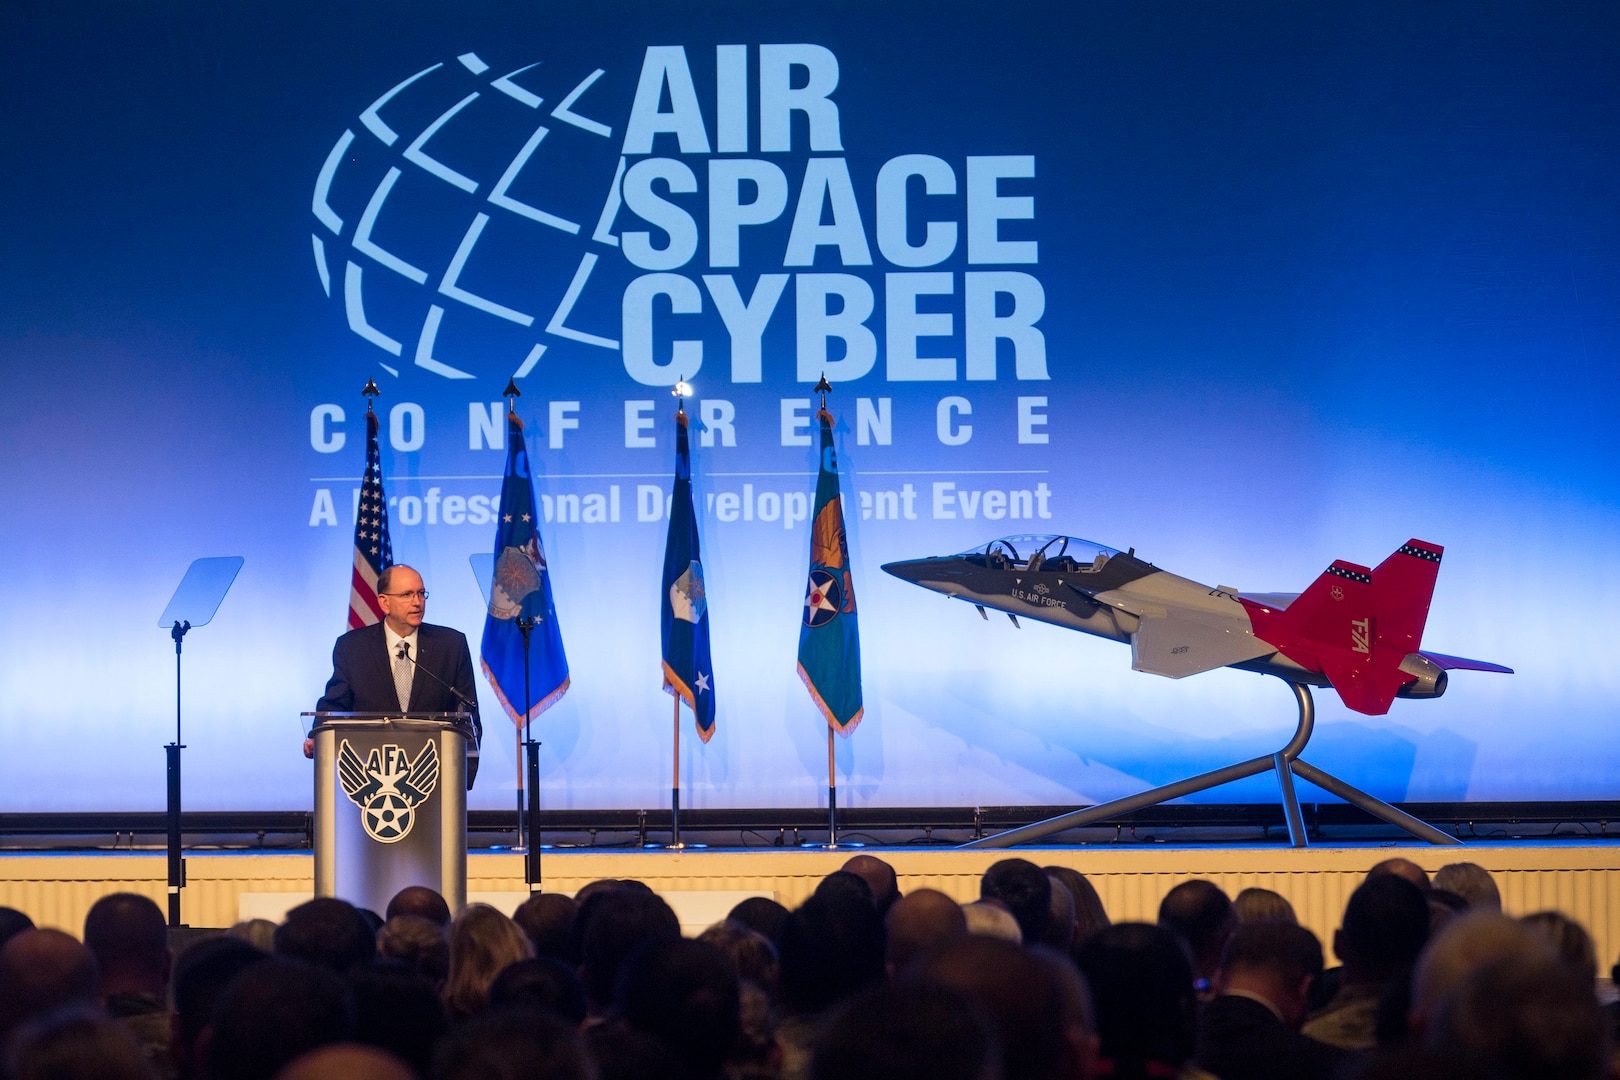 Acting Secretary of the Air Force Matthew P. Donovan reveals the name of the new Air Force trainer aircraft to be the T-7A Red Hawk during the Air Force Association Air, Space and Cyber Conference in National Harbor, Maryland Sept. 16.